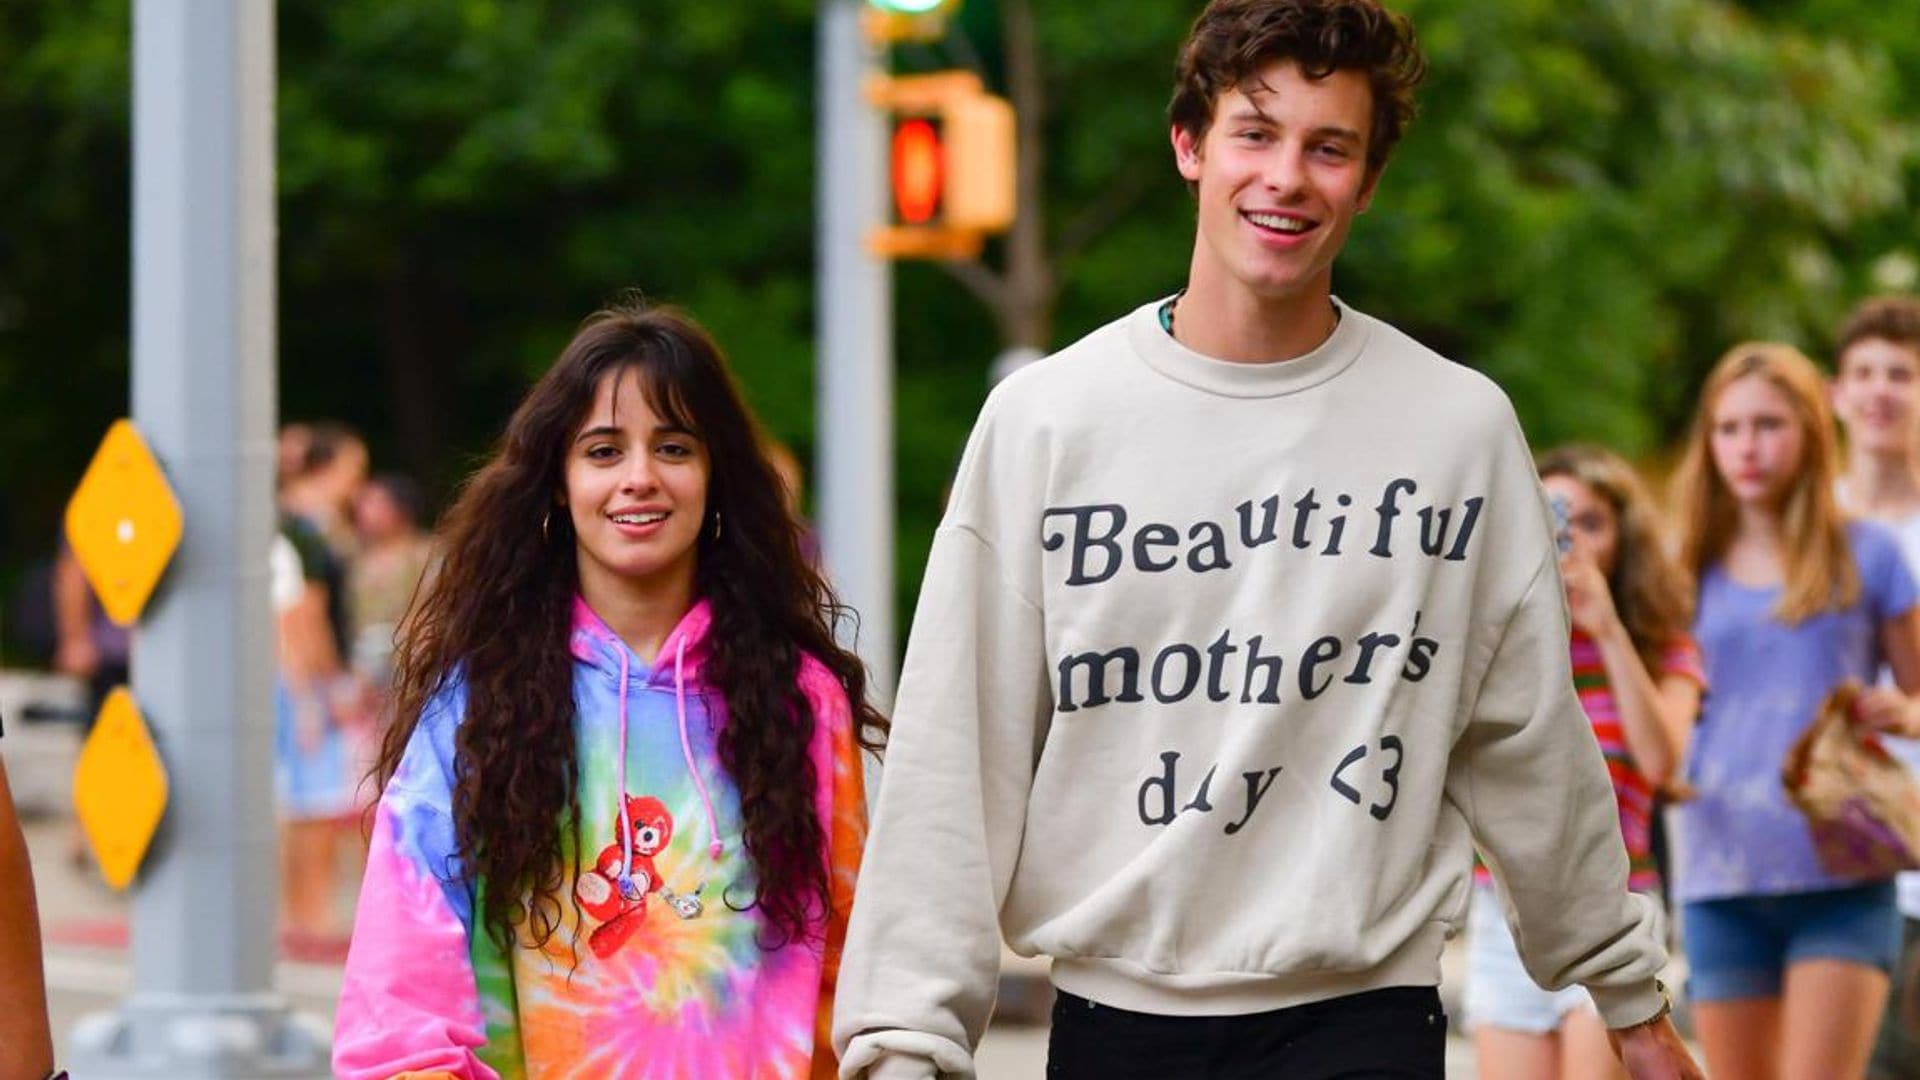 Watch Camila Cabello’s epic cooking failure while self-isolating with Shawn Mendes